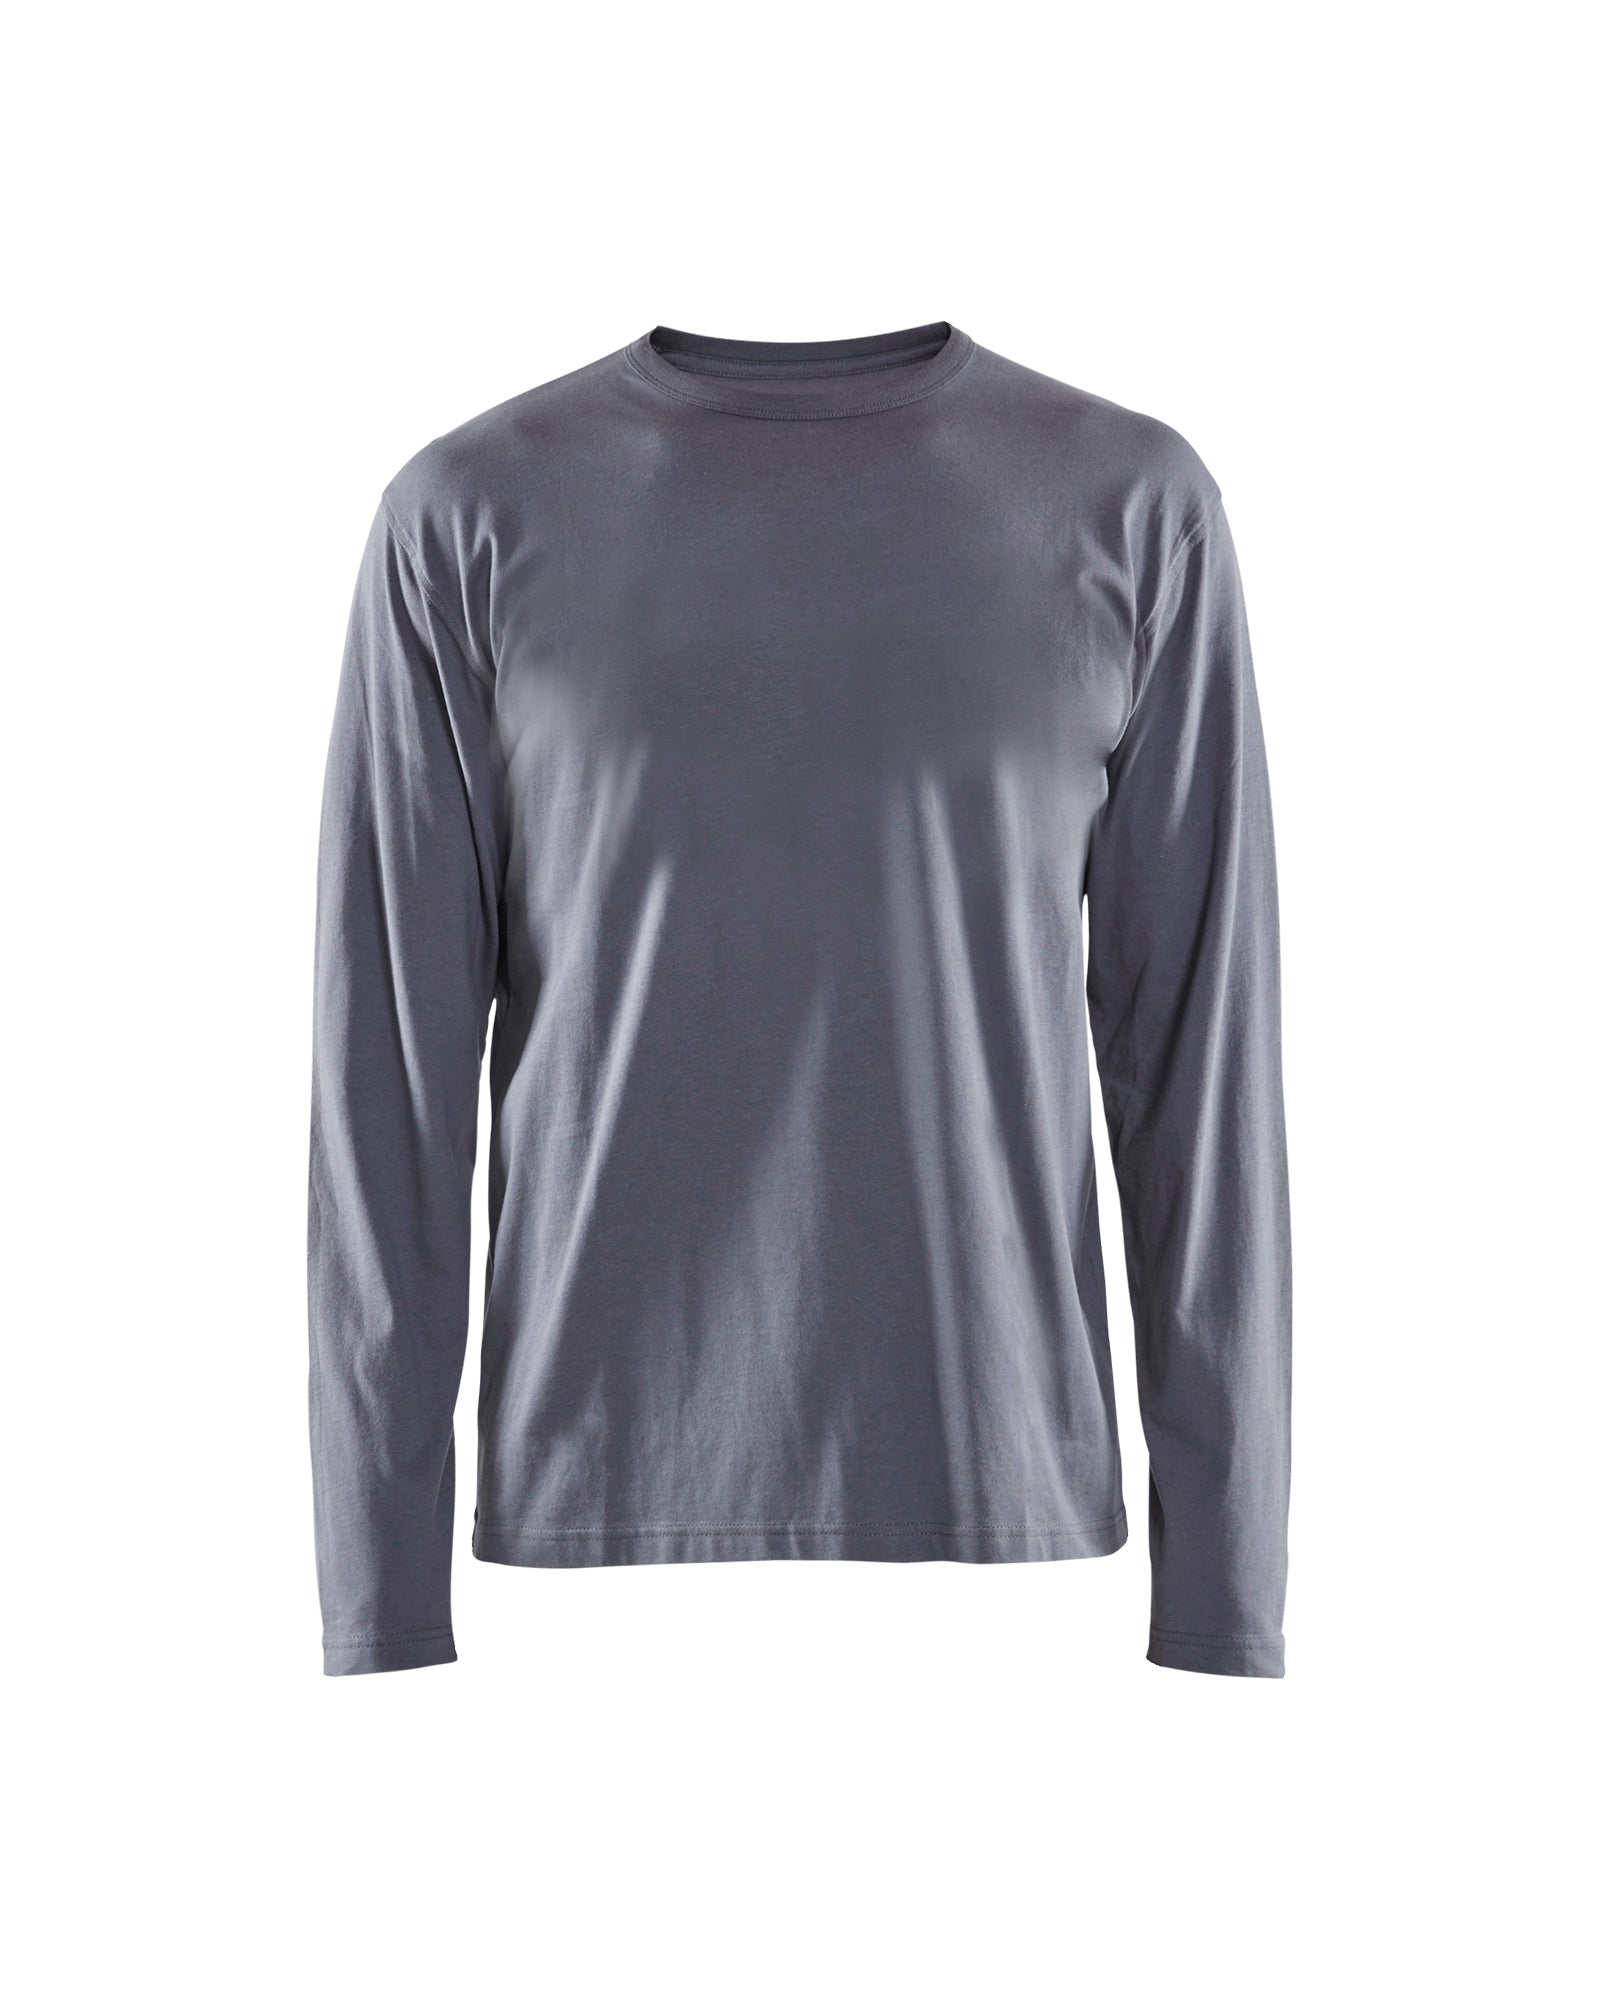 Men's Blaklader US Long Sleeves T-Shirt in Grey from the front view